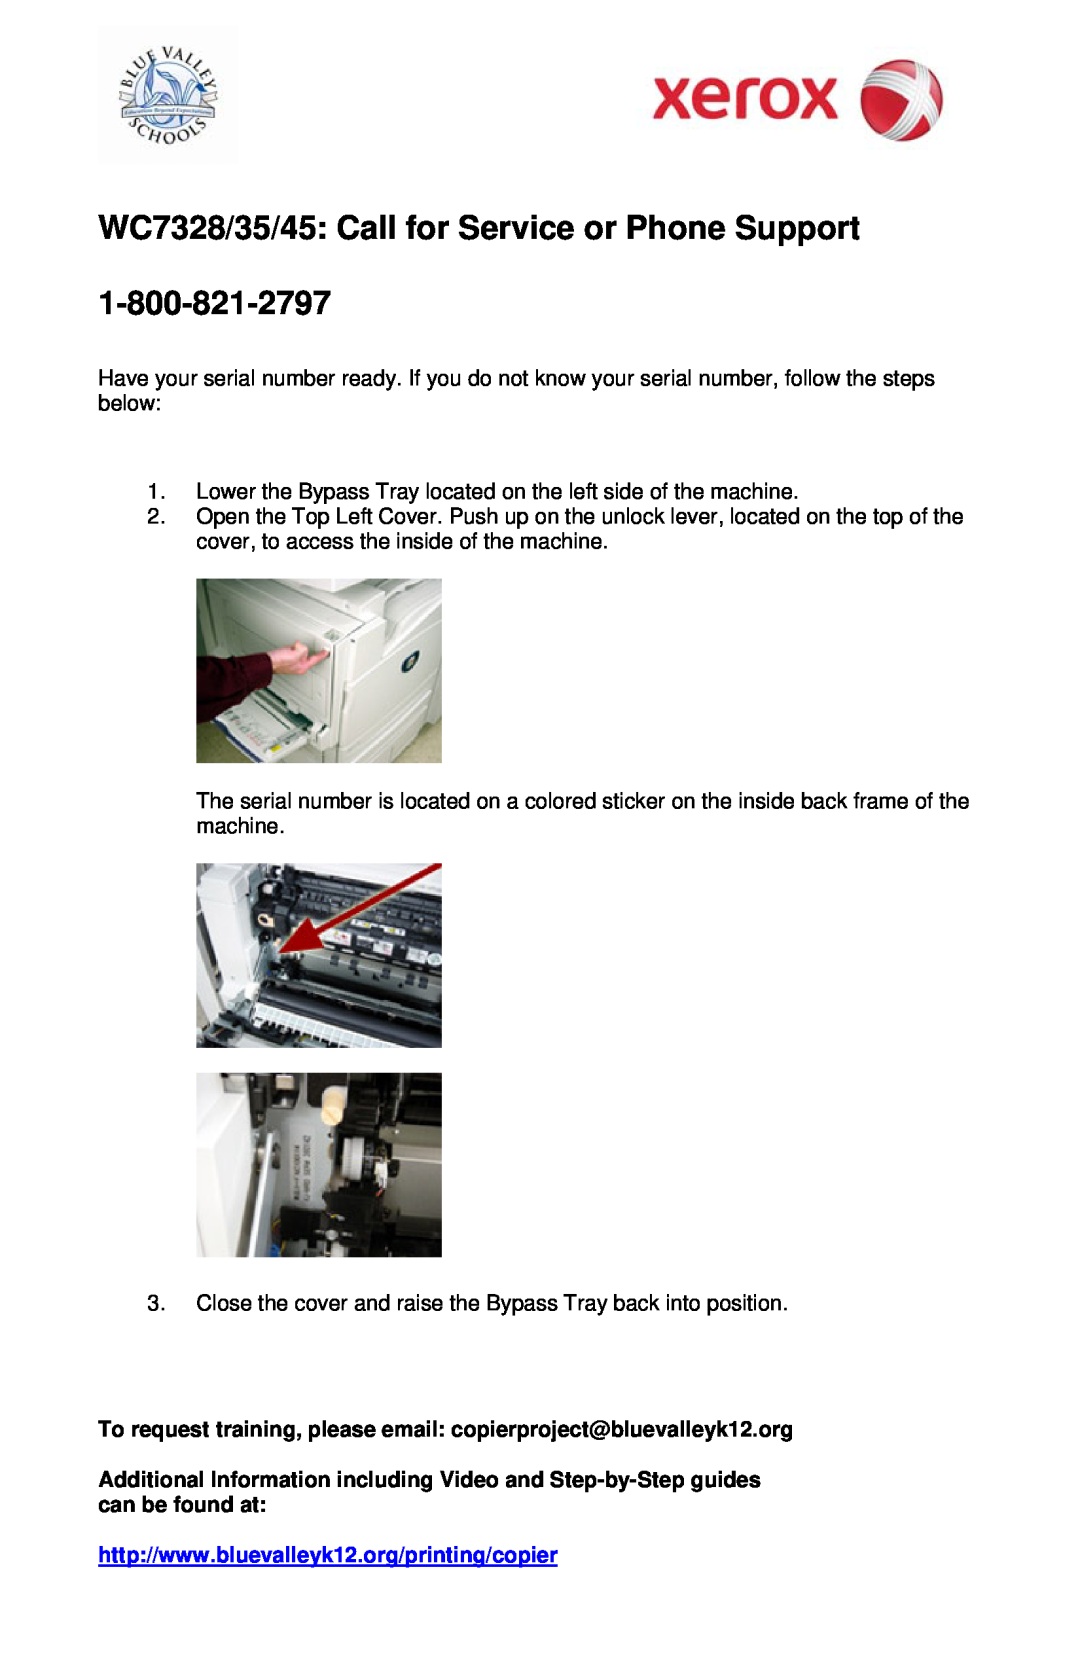 Xerox manual WC7328/35/45: Call for Service or Phone Support, 1-800-821-2797 